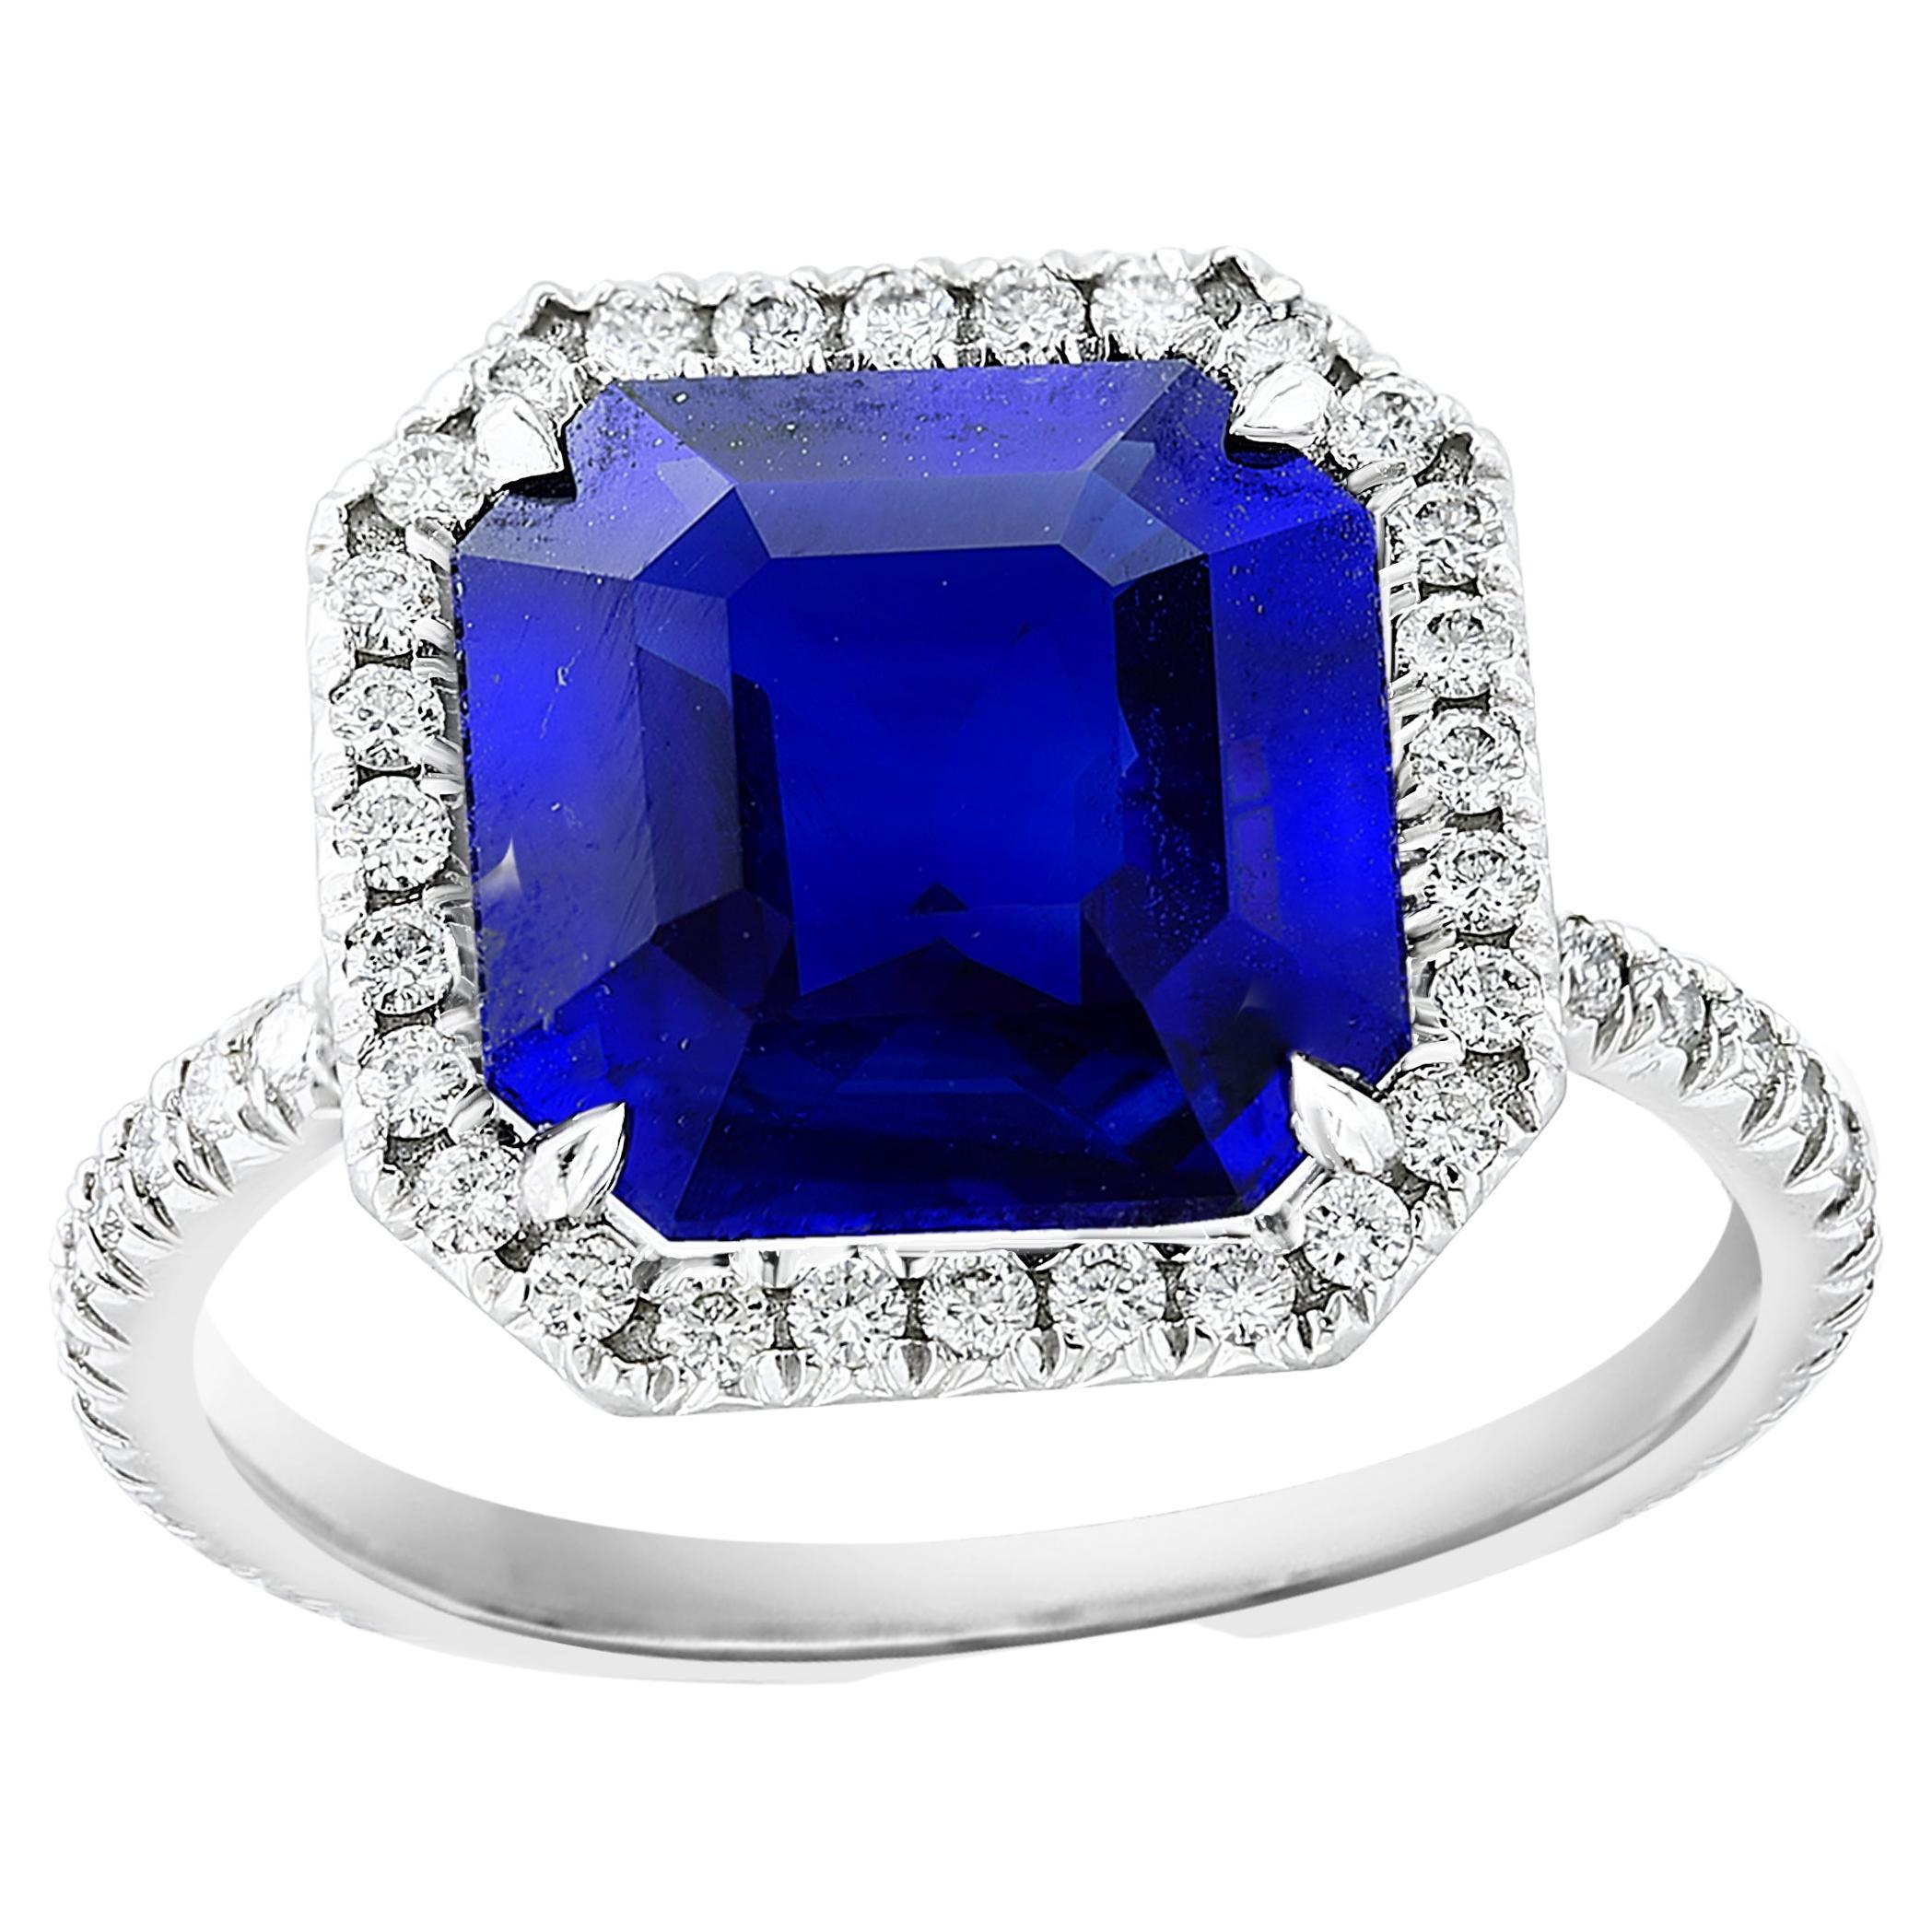 CERTIFIED 5.14 Carat Step Cut Sapphire and Diamond Engagement Ring in Platinum For Sale